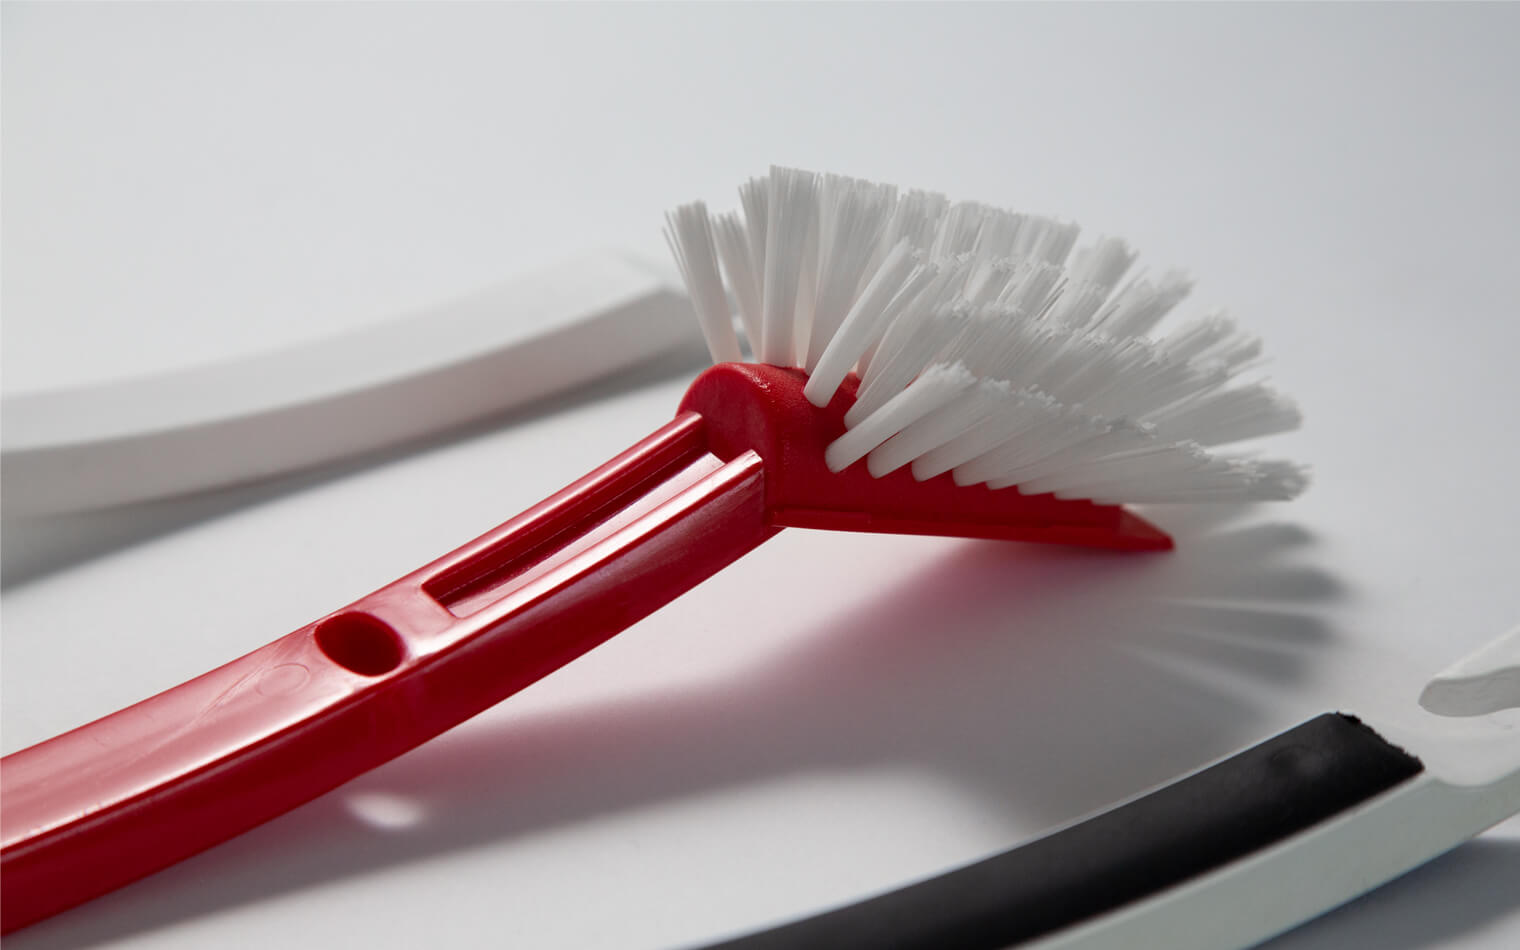 On this picture you can see the dishwashing brush head and handle in a detailed view.